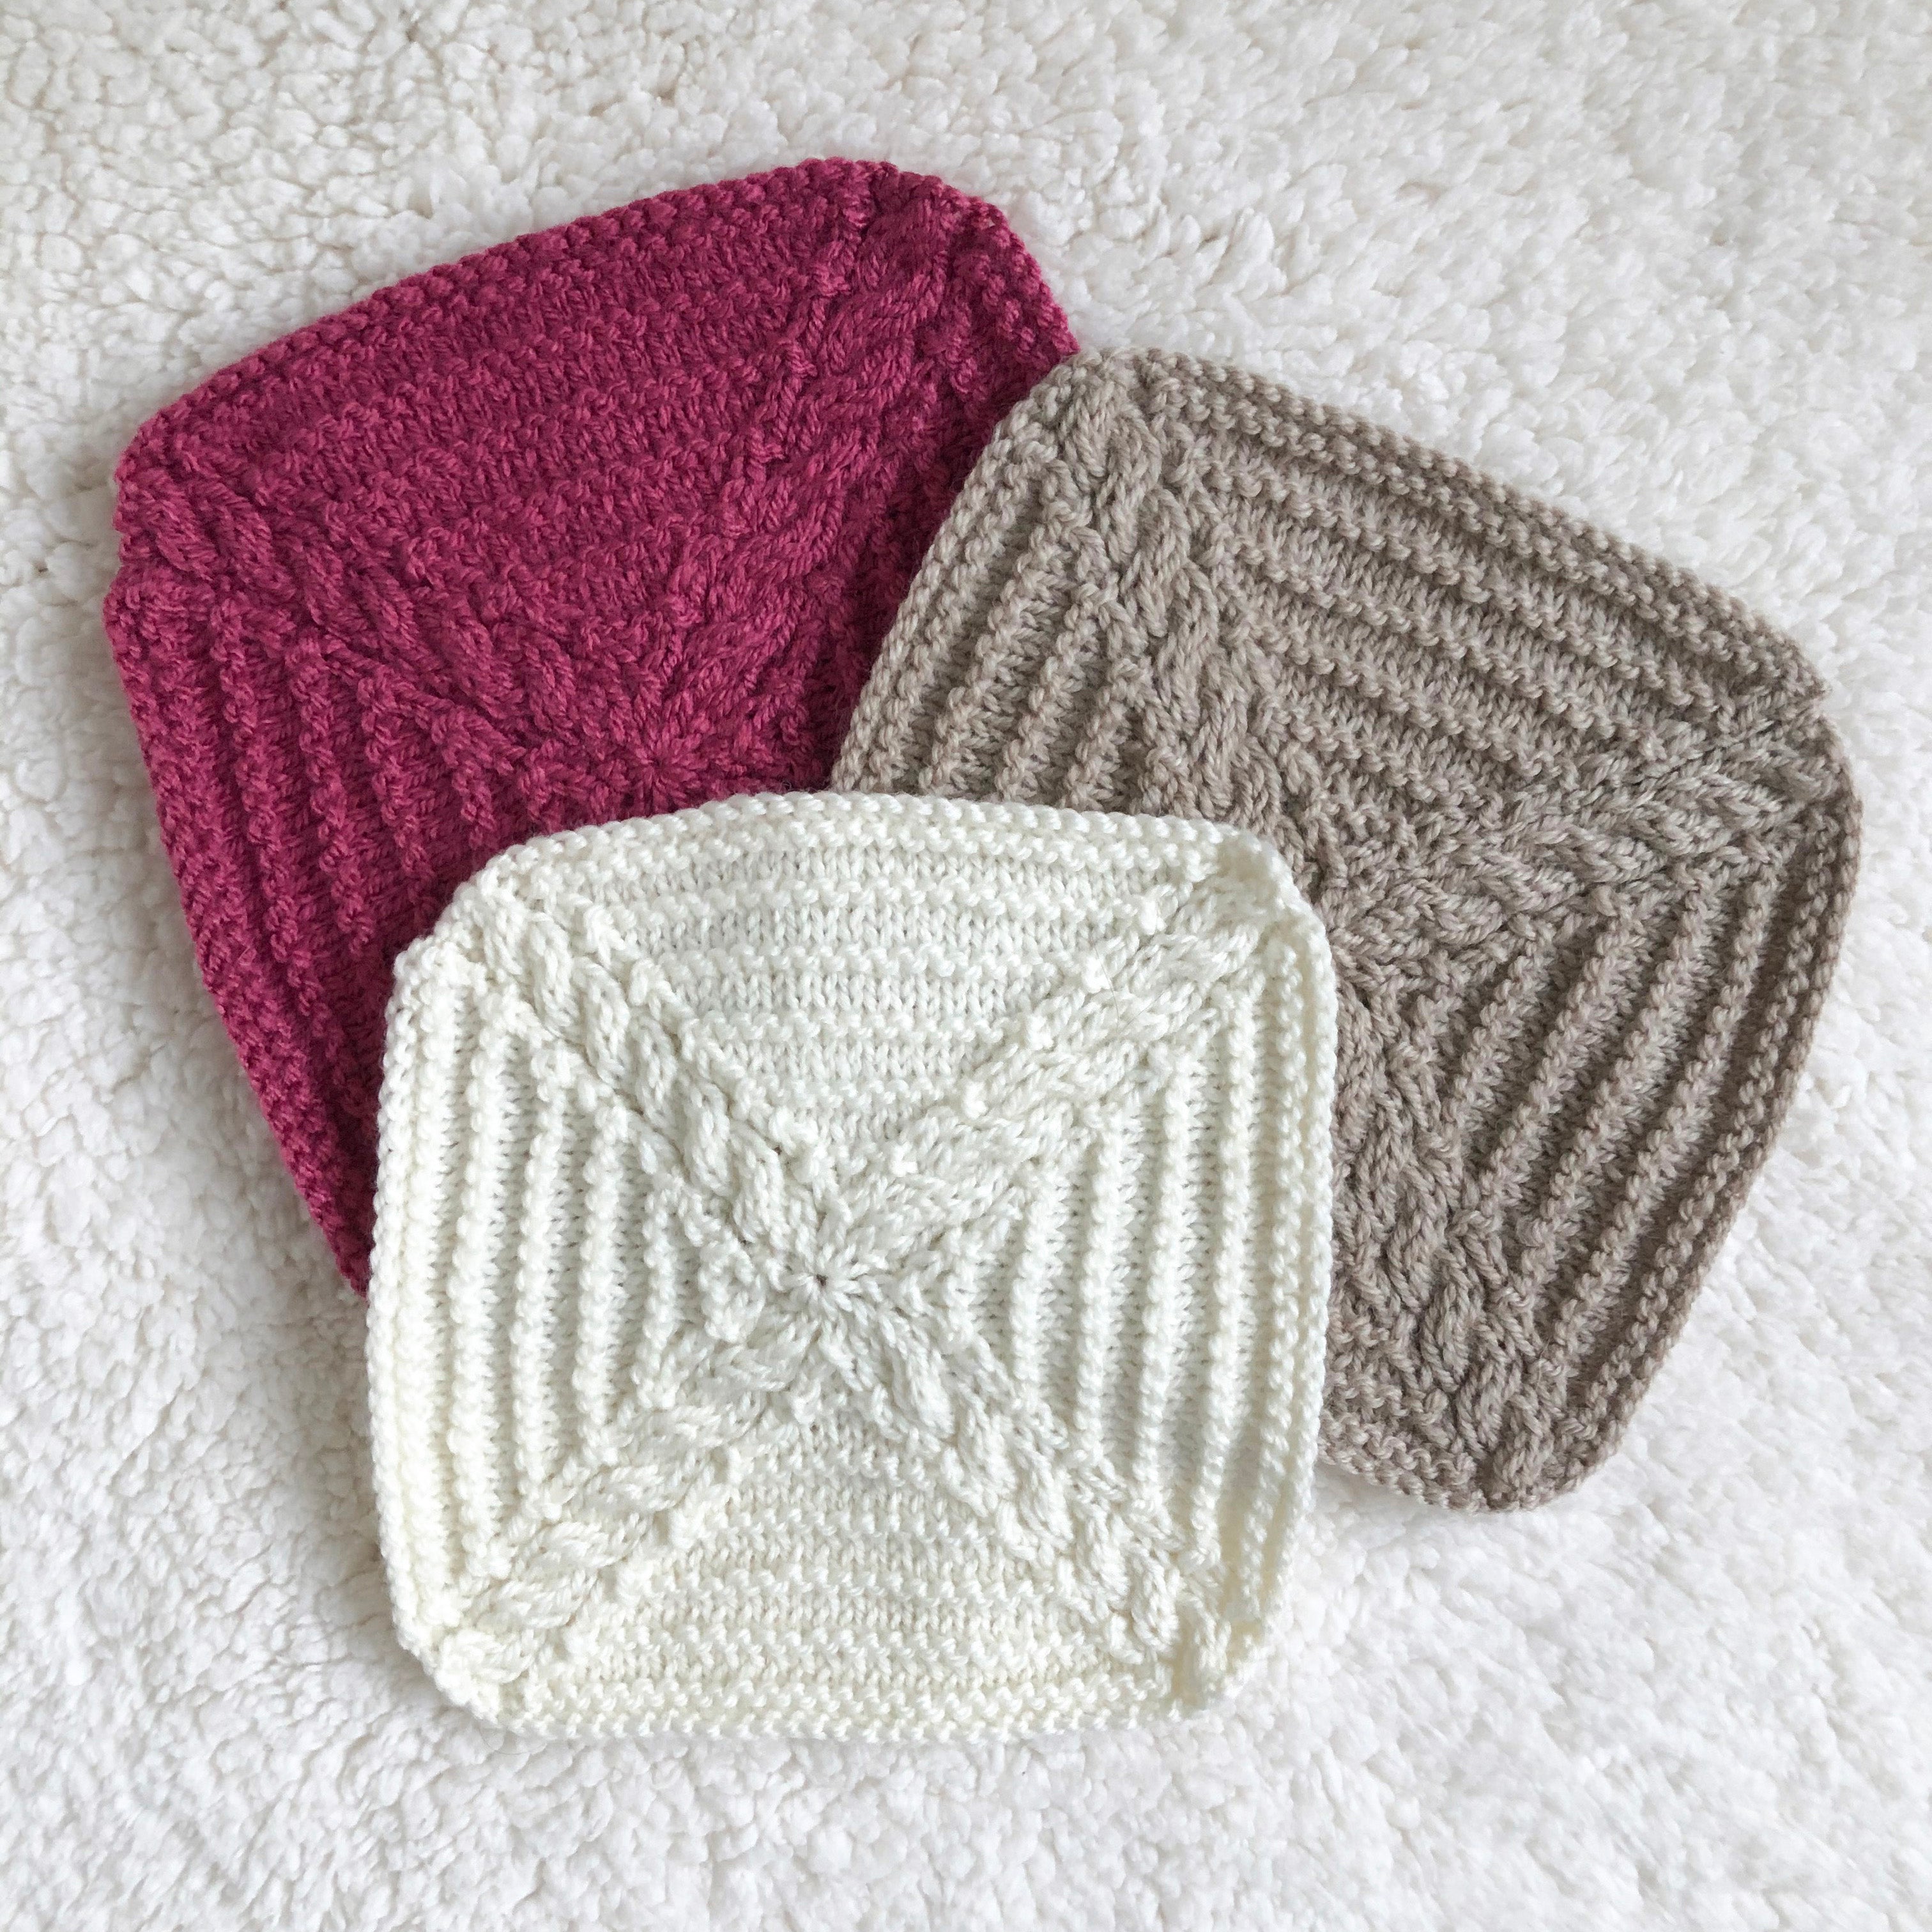 Week 7 Common Lane - A Day Out Knit Along Blanket by Sarah Hatton - Magic loop knitting